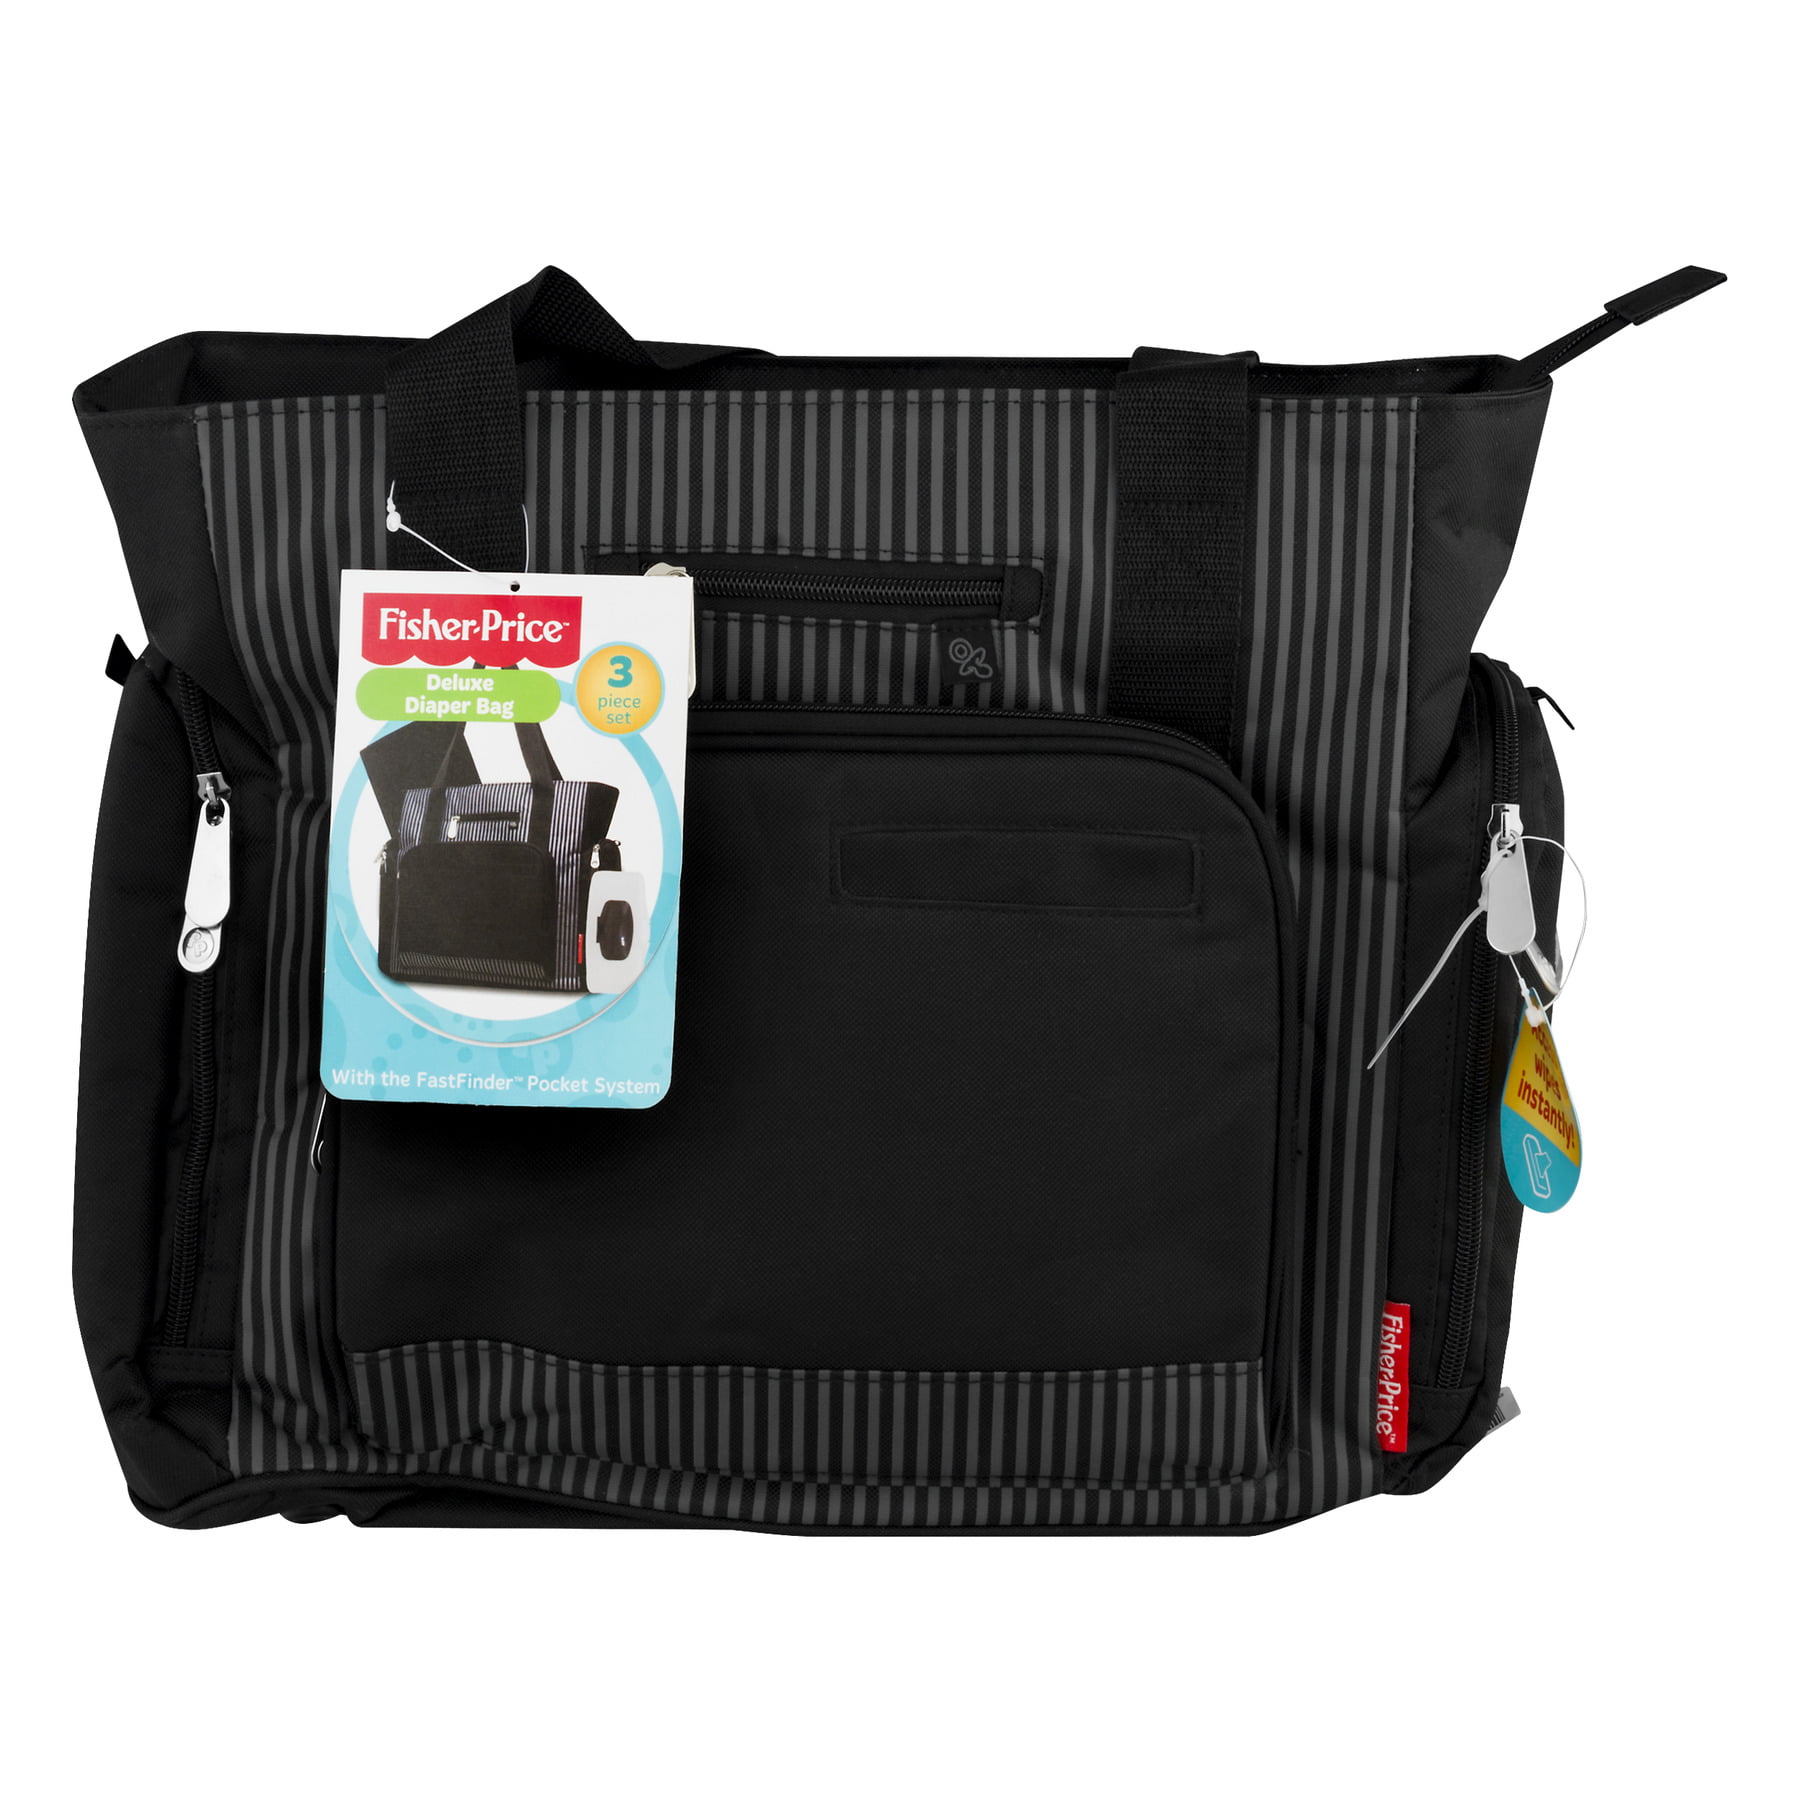 Fisher-Price Tote Diaper Bag with Fastfind Pocket System, Black - www.strongerinc.org - www.strongerinc.org